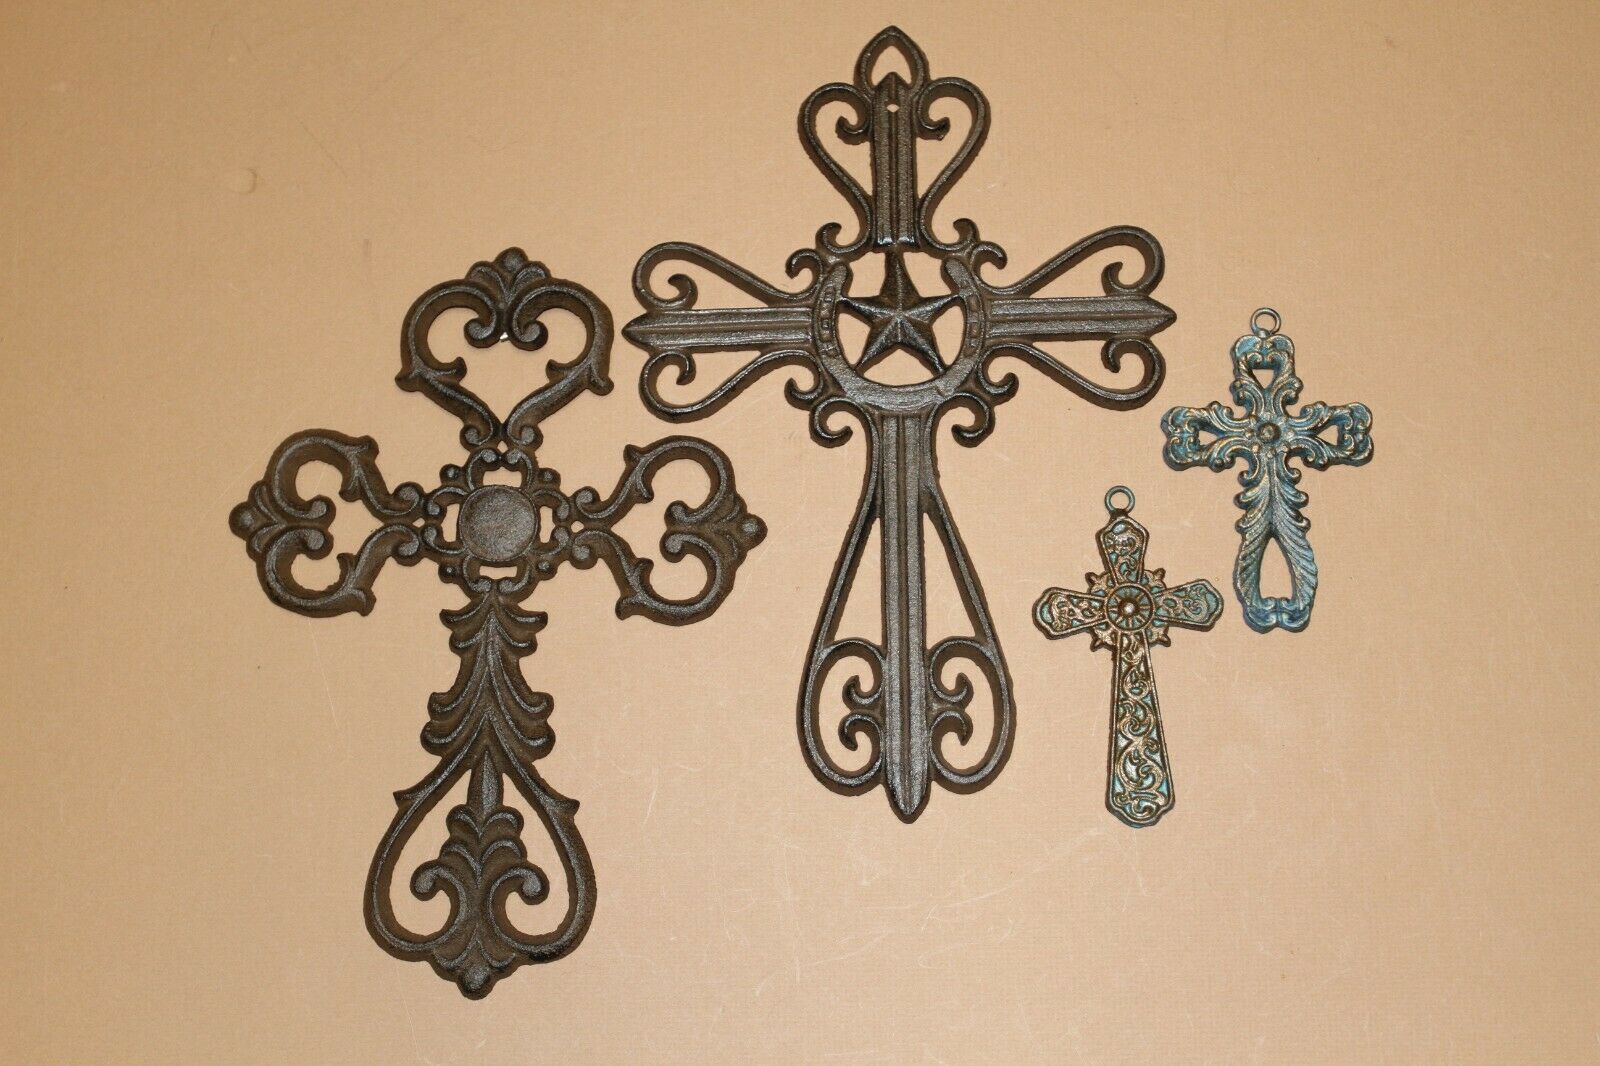 Texas Country Home Decor Gift For Mom Rustic Cast Iron Wall Crosses, Francisco 4